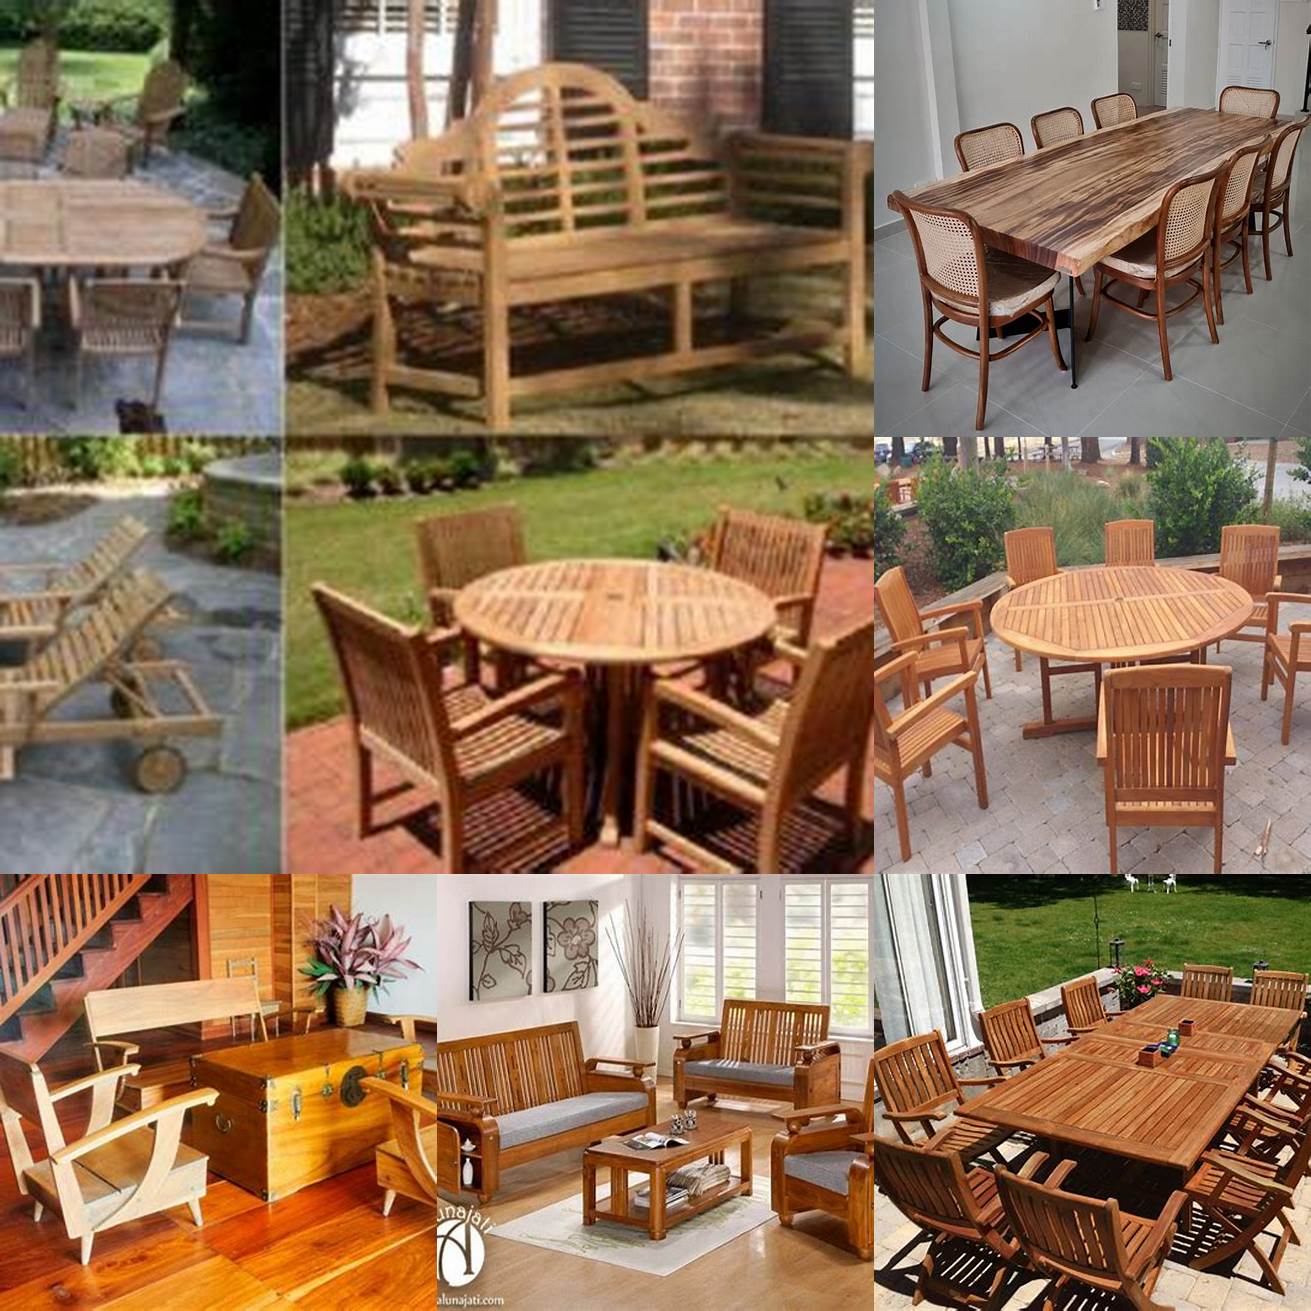 A picture of different types of teak furniture